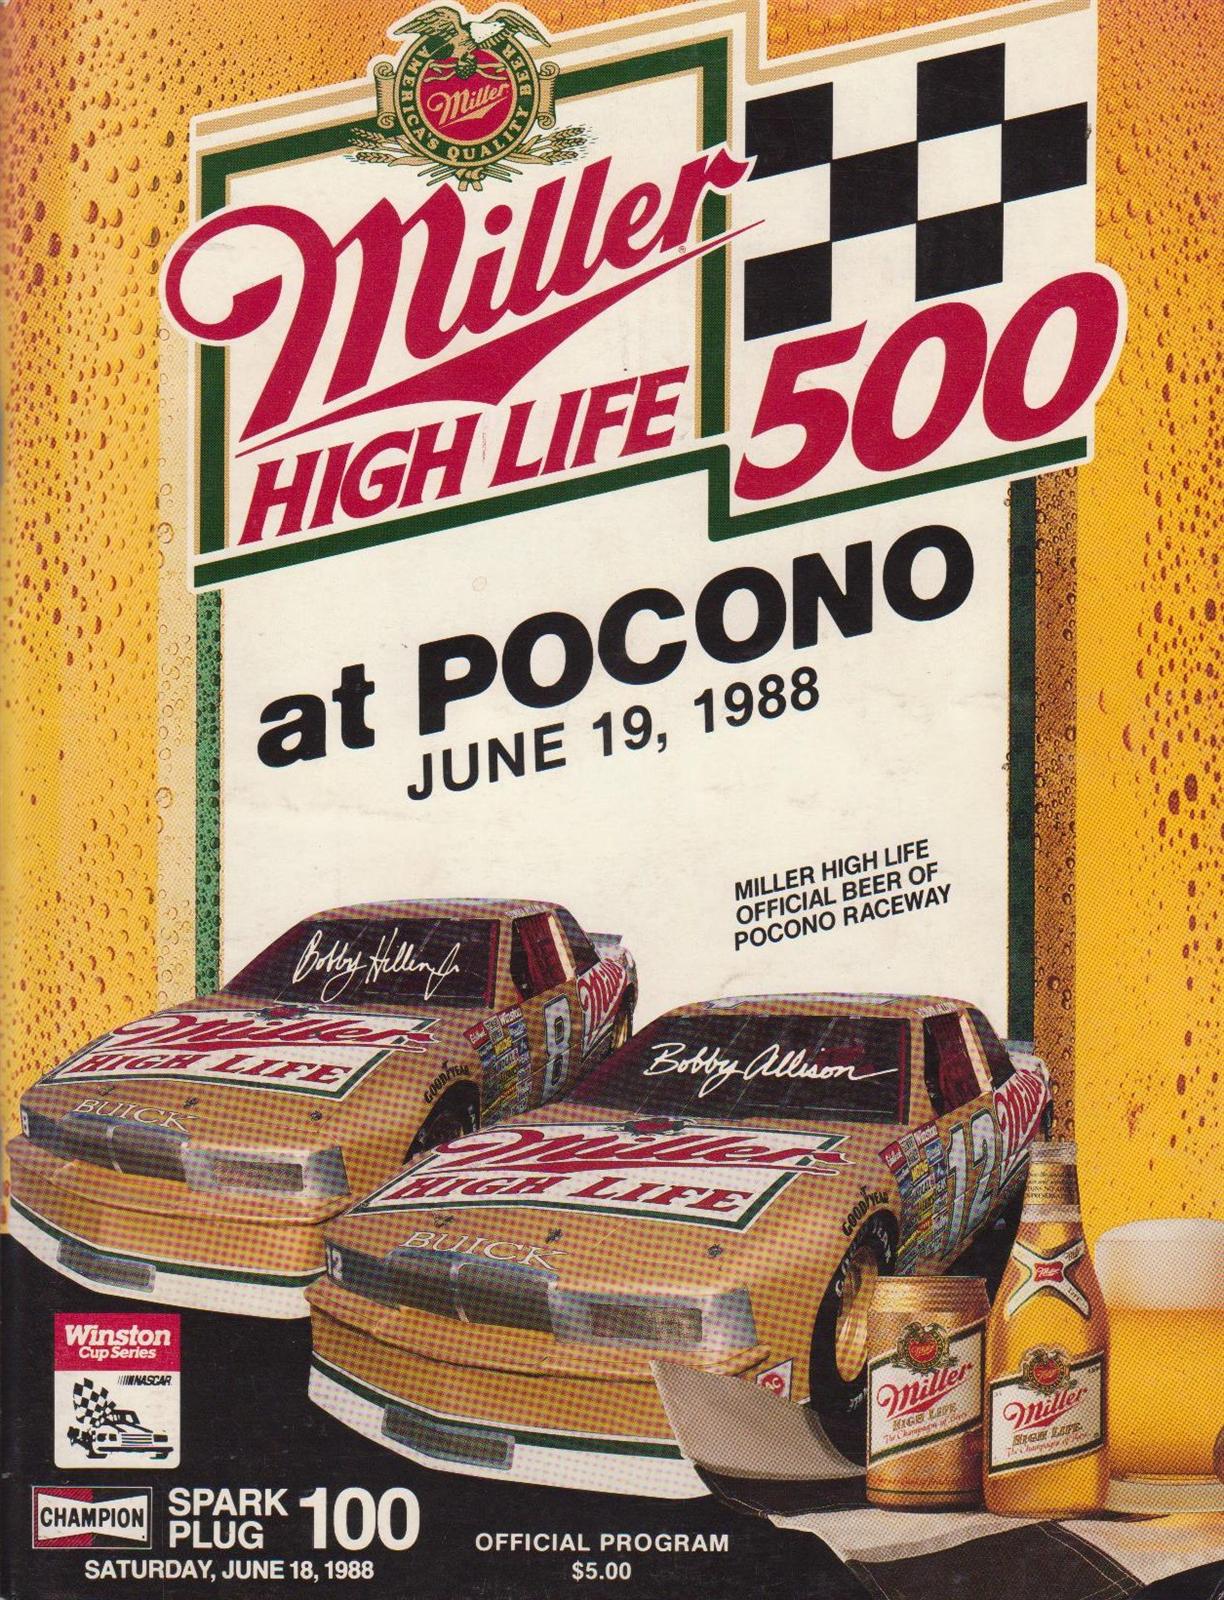 1988 Miller High Life 500 - 1988 Miller High Life 500 (partially lost footage of NASCAR Winston Cup Series race; 1988)